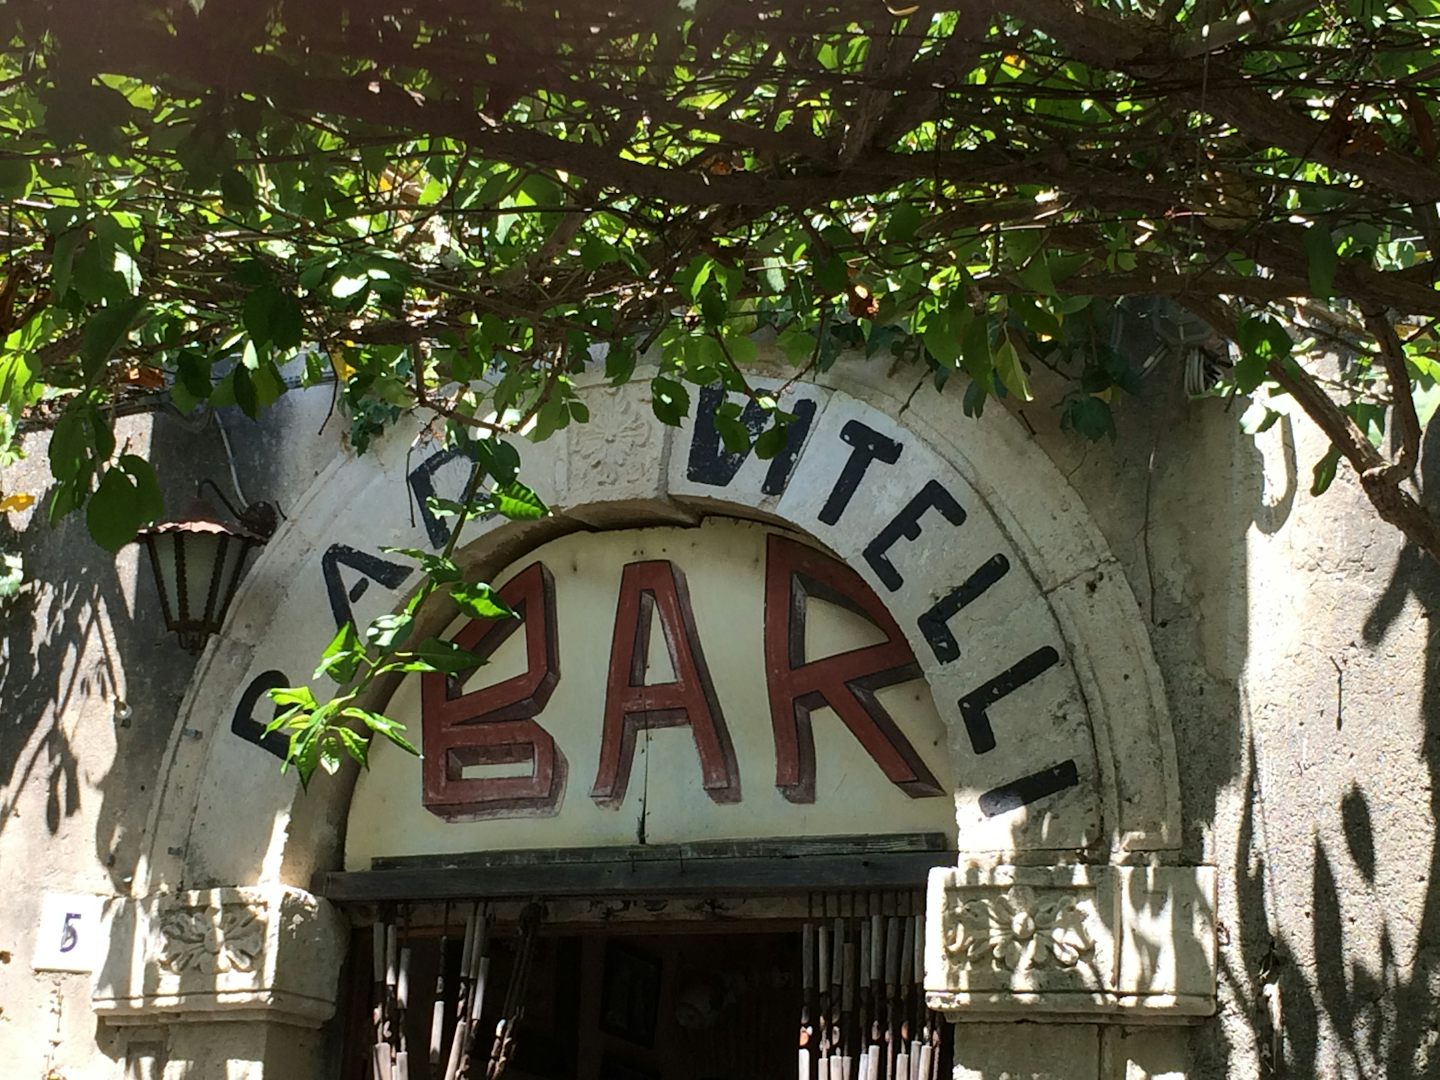 Bar from the film during the "In the footsteps of the Godfather" ex